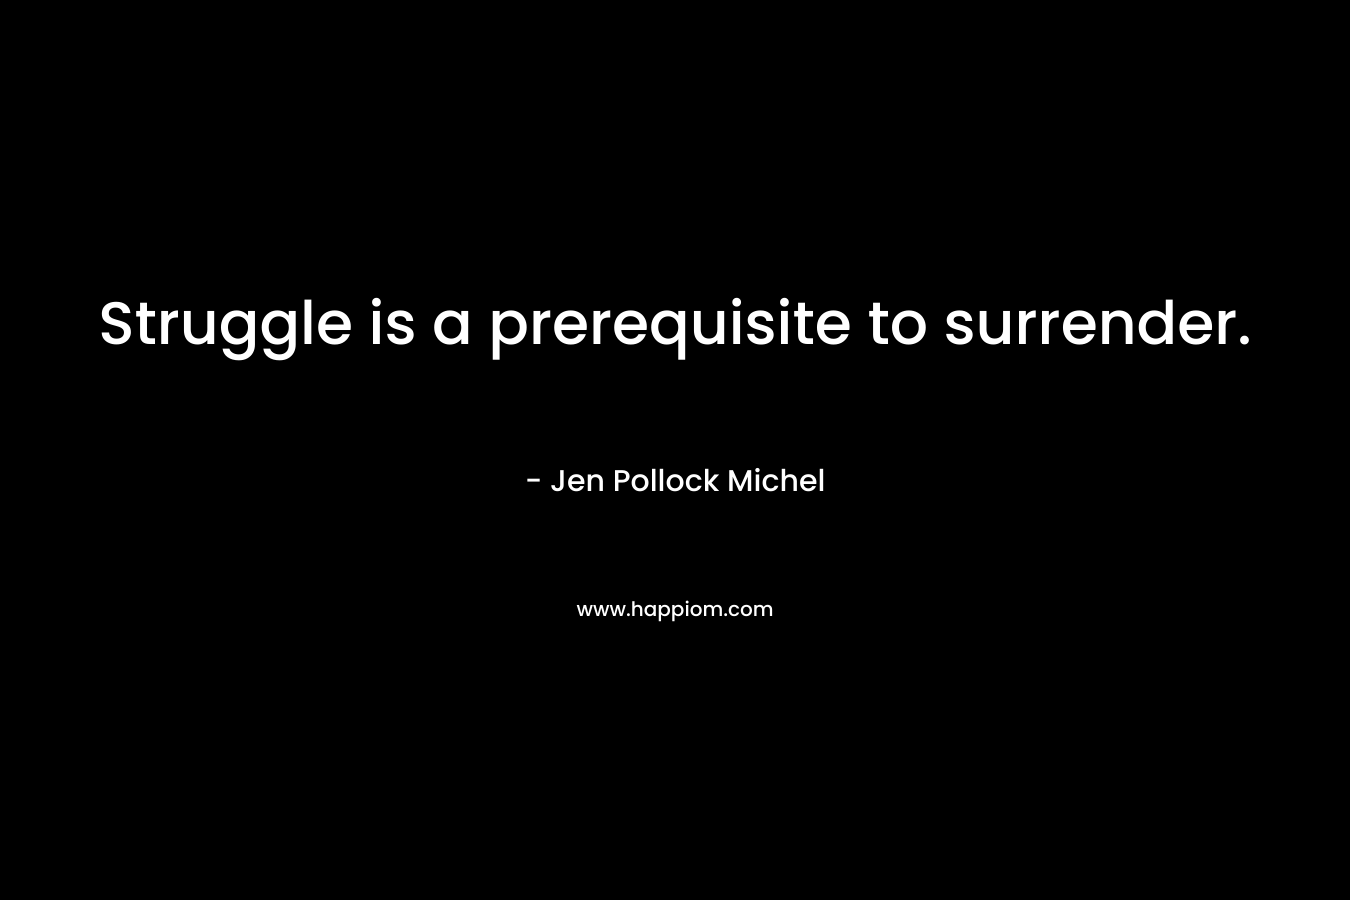 Struggle is a prerequisite to surrender.